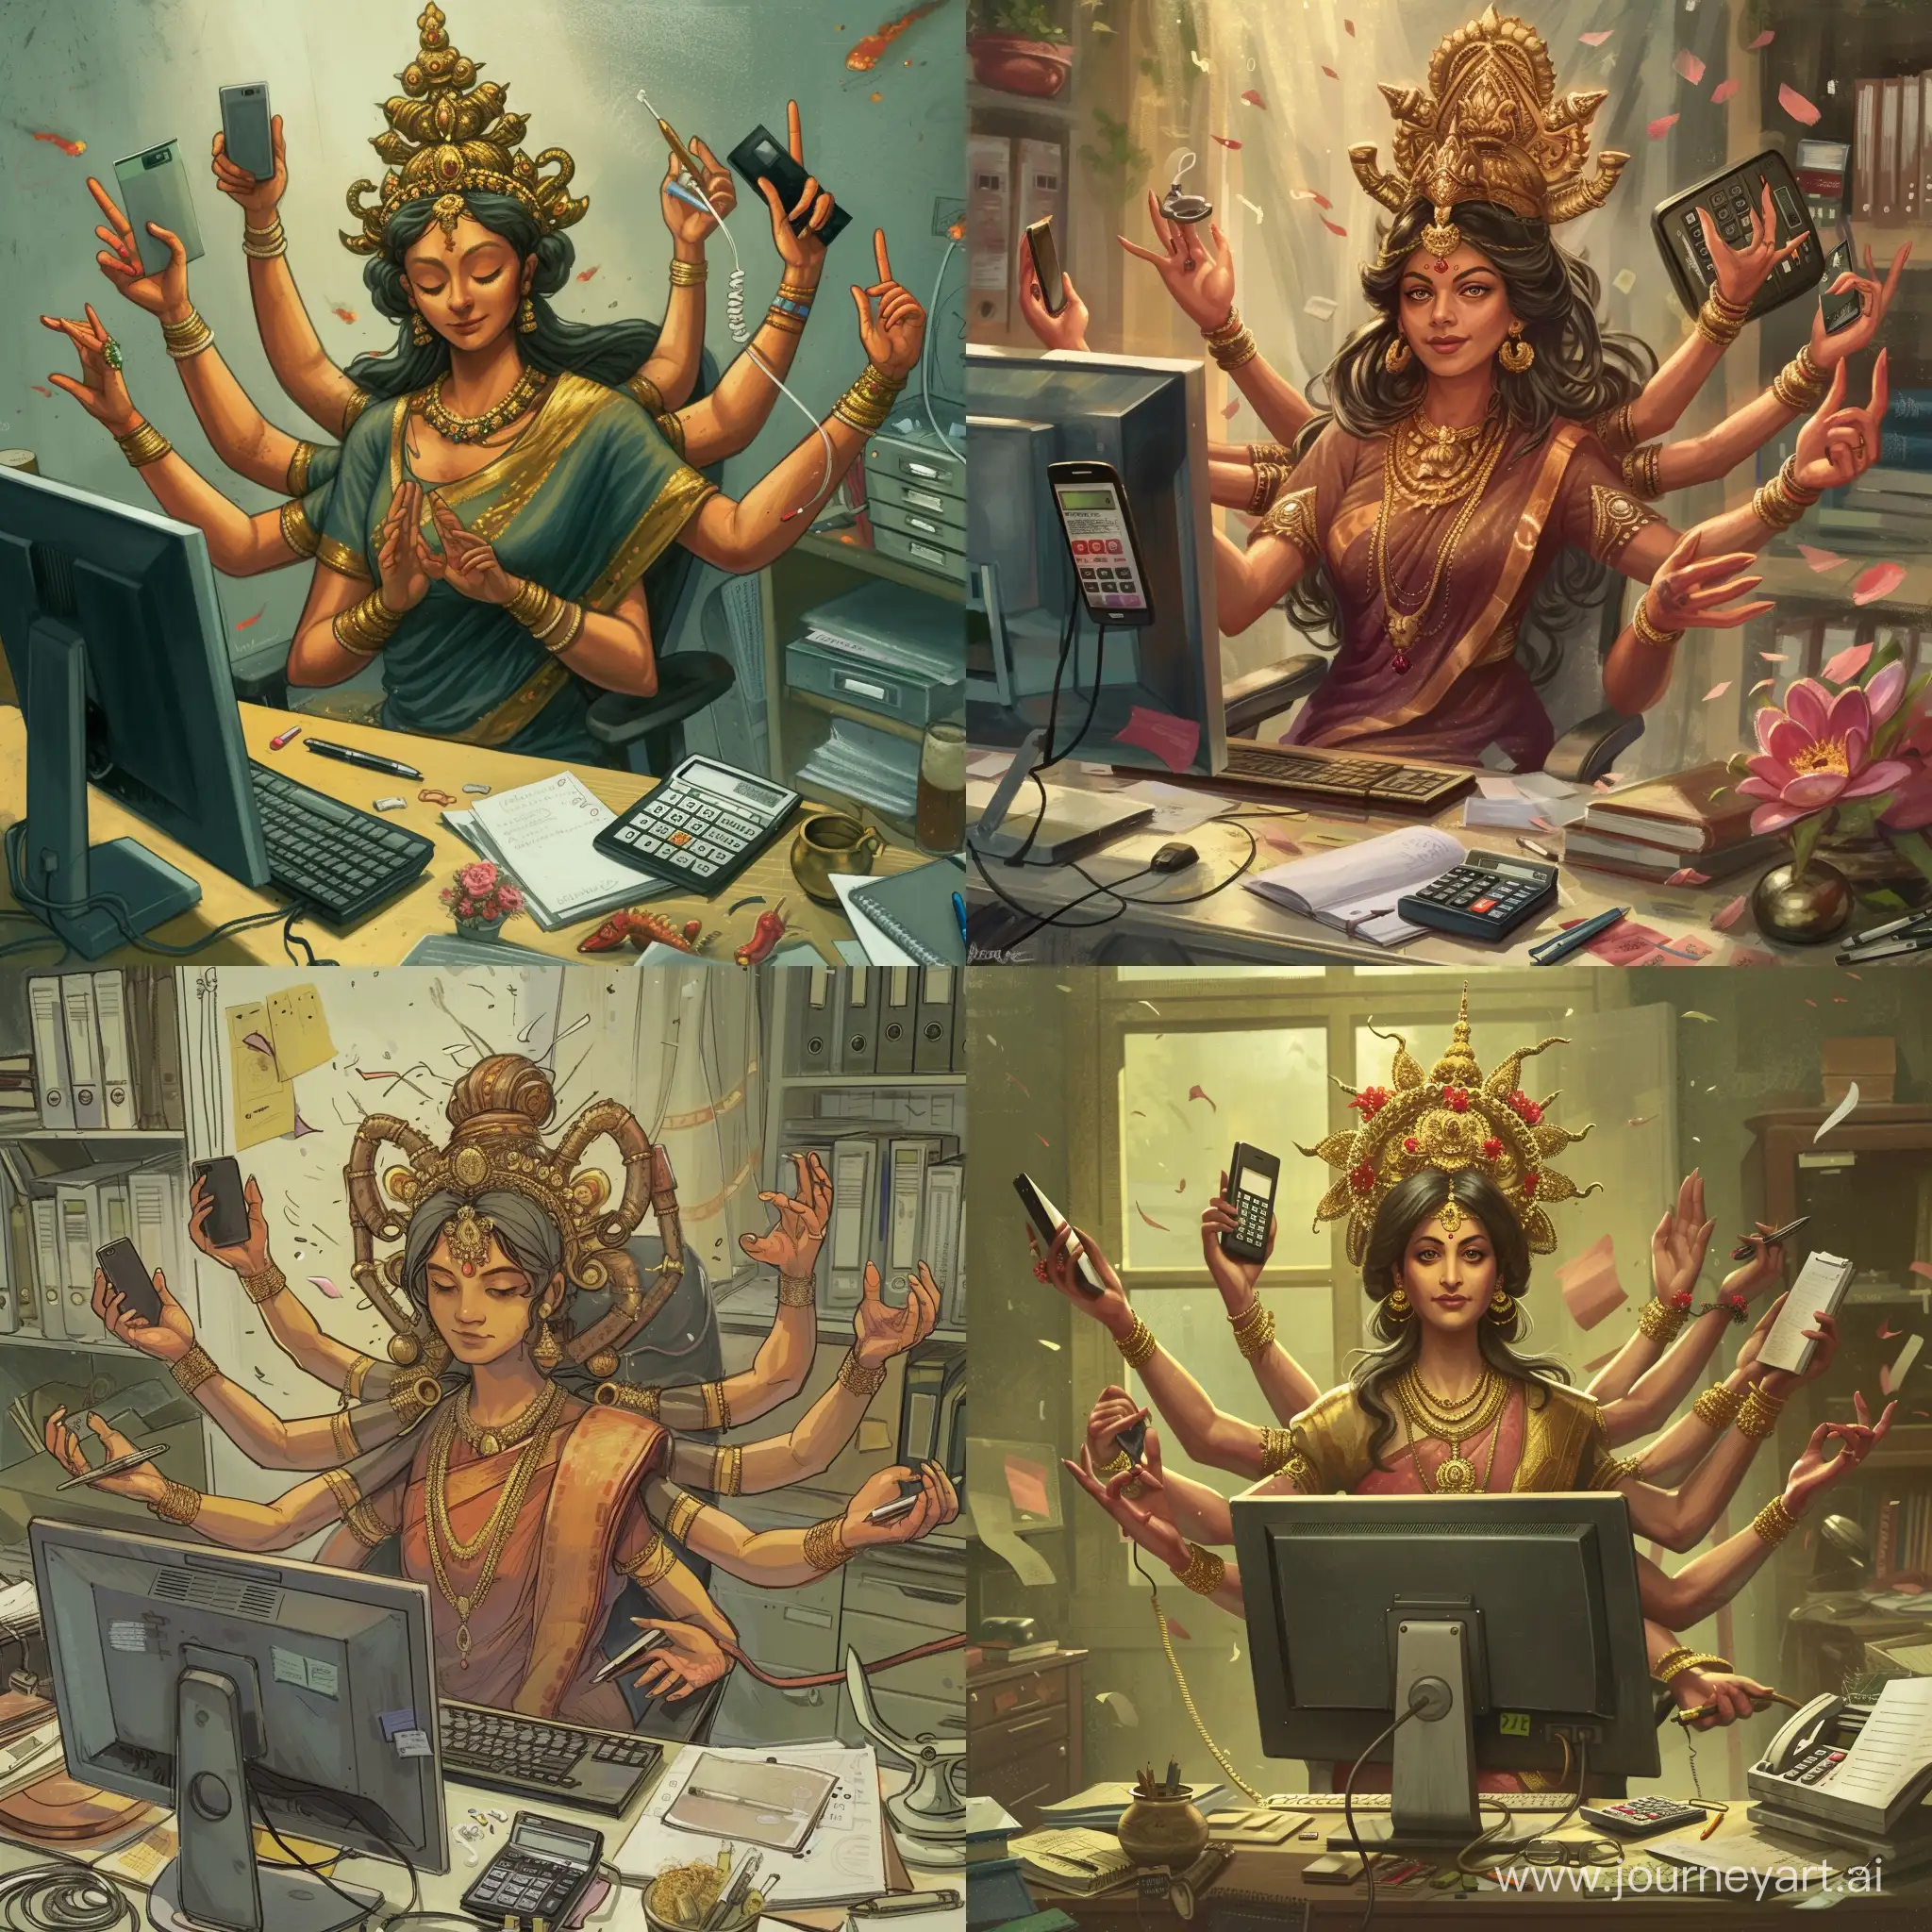 Create an image of a ten-armed goddess in an office room sitting at a computer with a monitor. She has a work phone in one hand, a calculator in the other hand, and a pen and notebook in one hand. There is chaos all around.